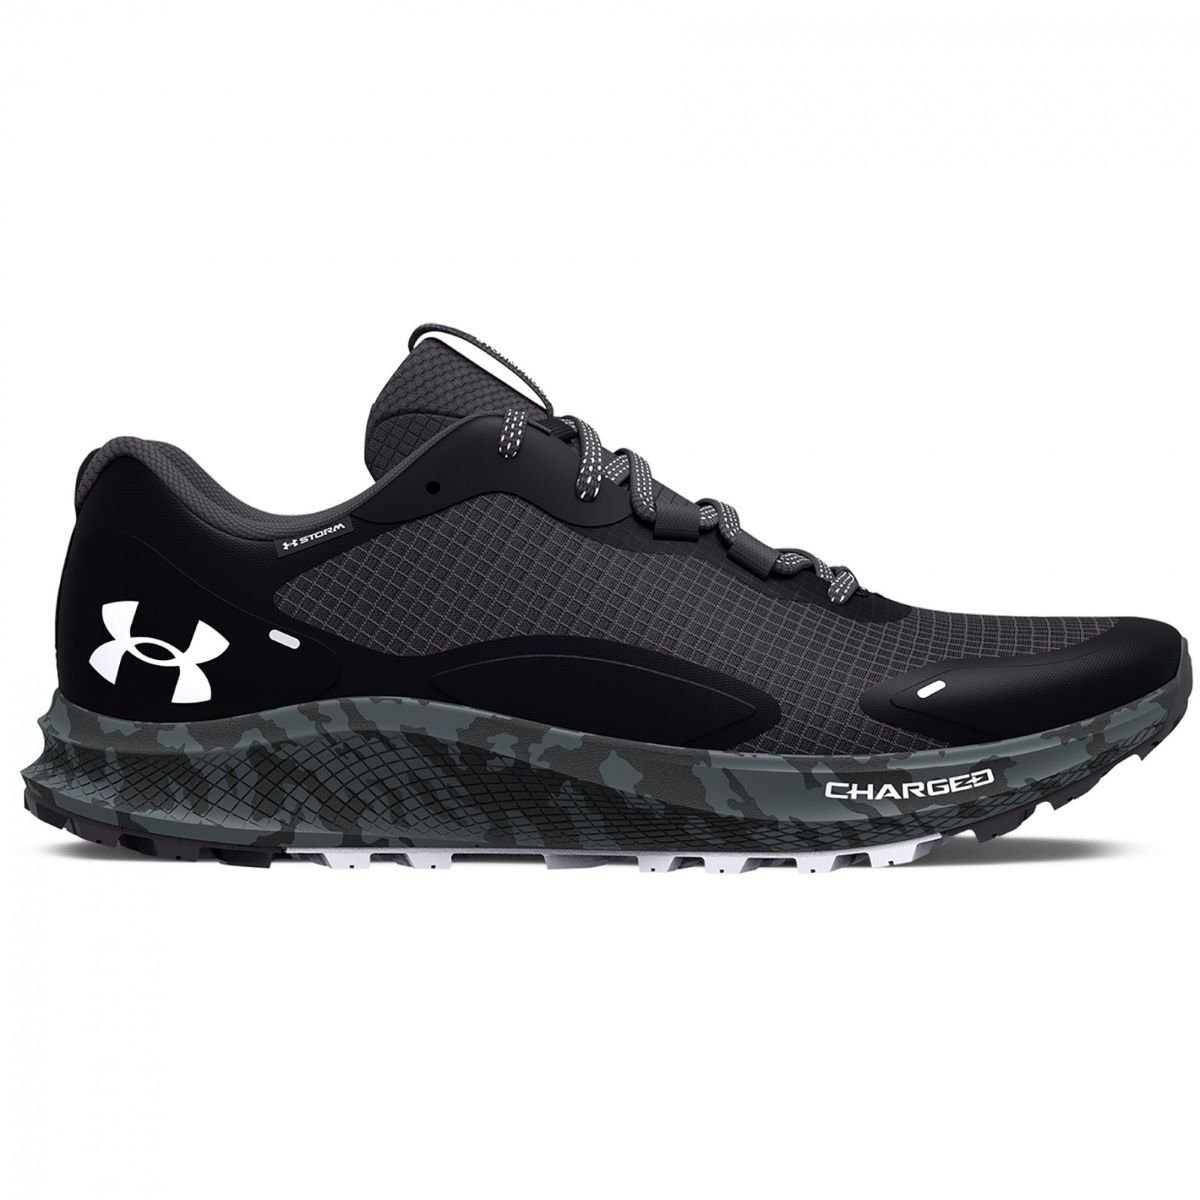 Under Armour Charged Bandit TR 2 SP W 3024763-002 - black 1